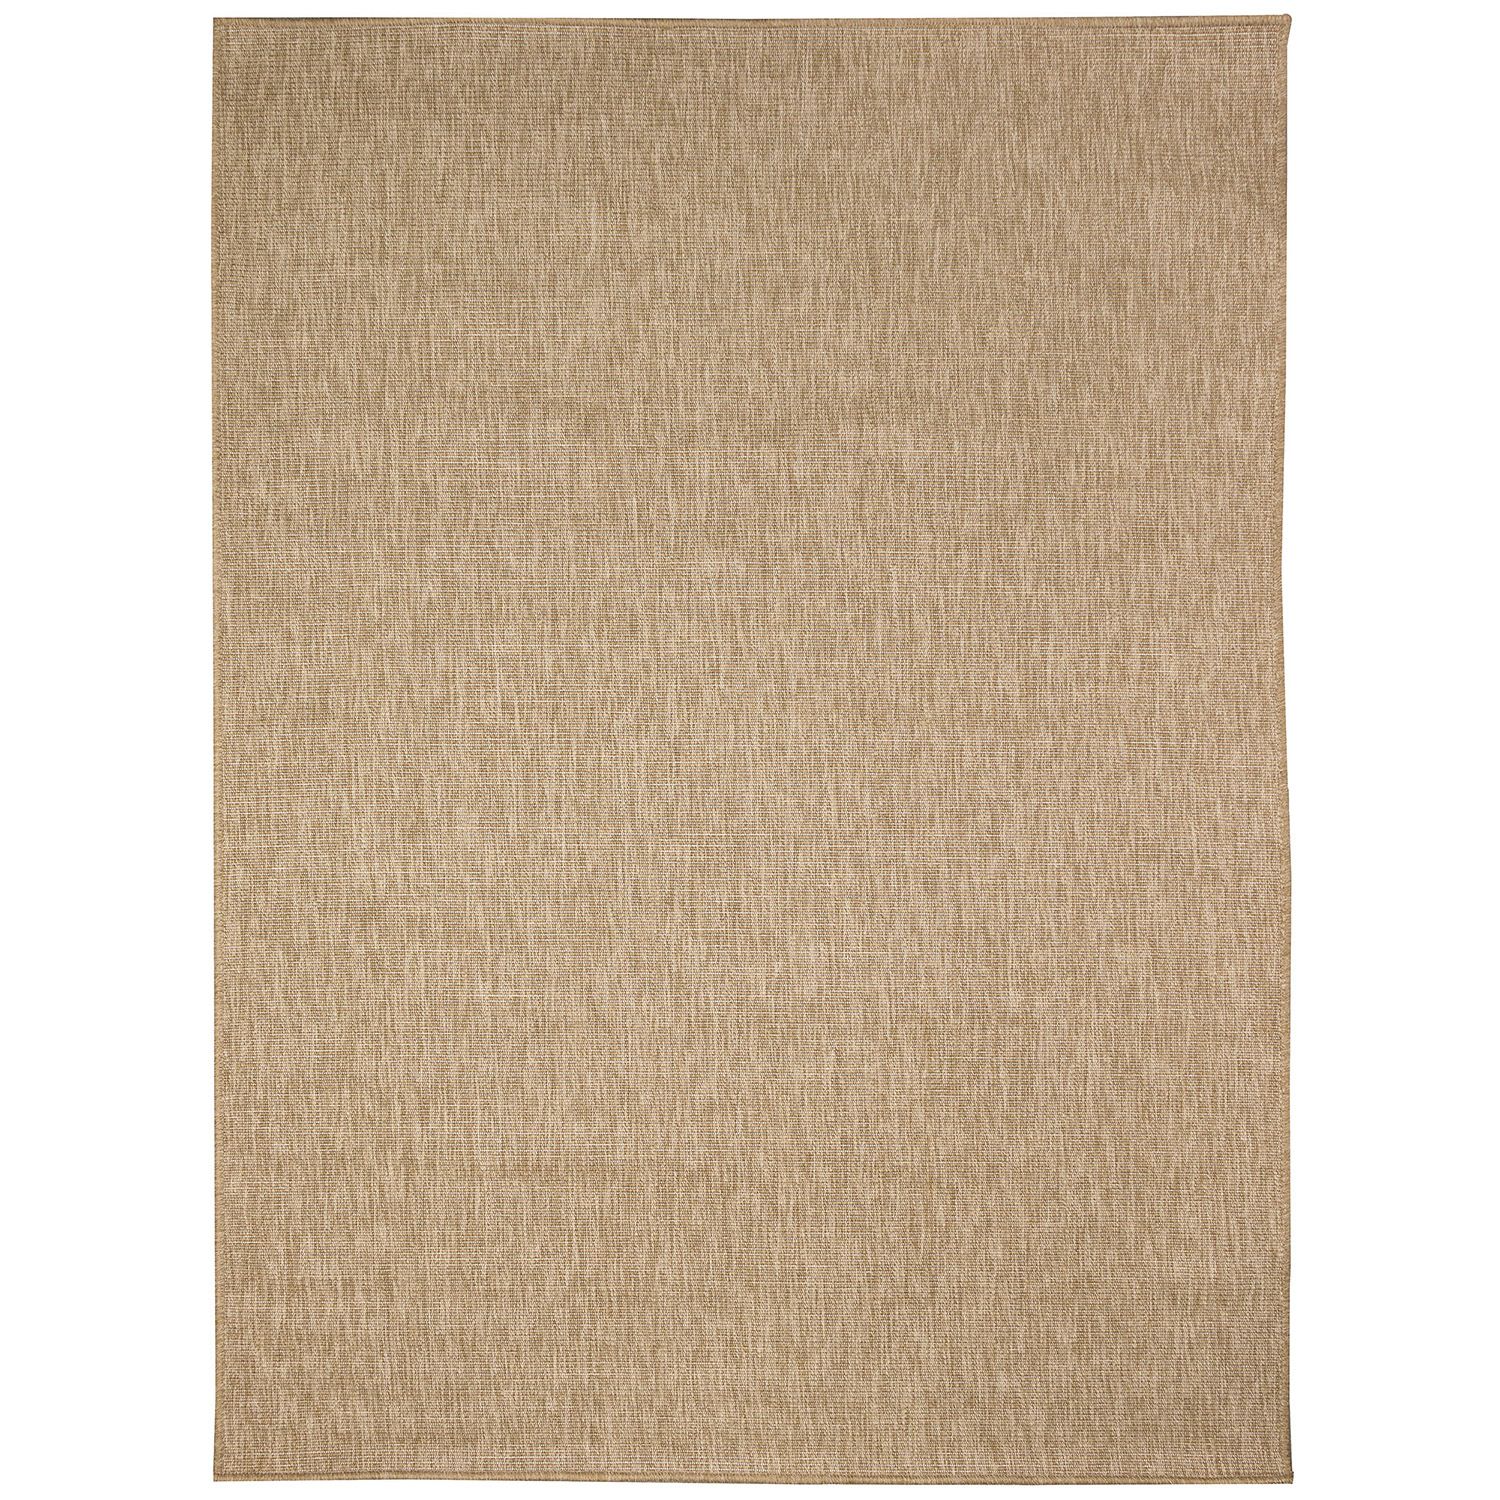 Liora Manne Sahara Low Profile  Easy Care Woven Weather Resistant Rug- Plains Neutral  Product Image